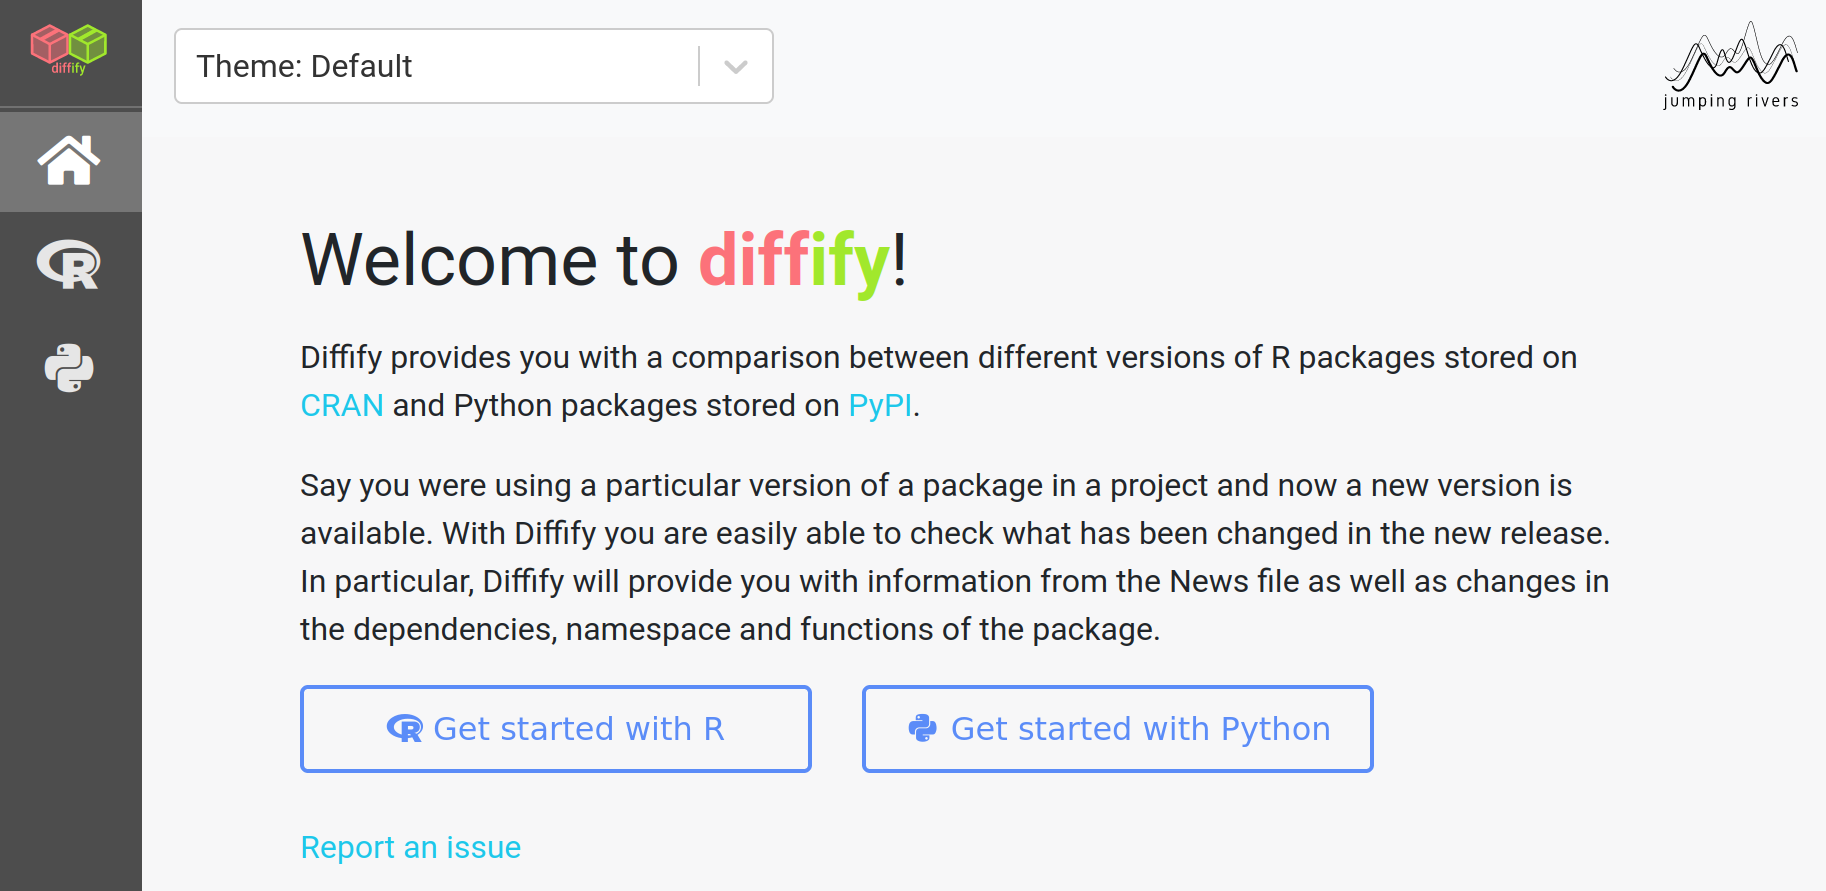 A screenshot of the new Diffify homepage: In the sidebar there are links to home, R and Python. The main body has some introduction text, and now contains a link to “Get started with Python”.